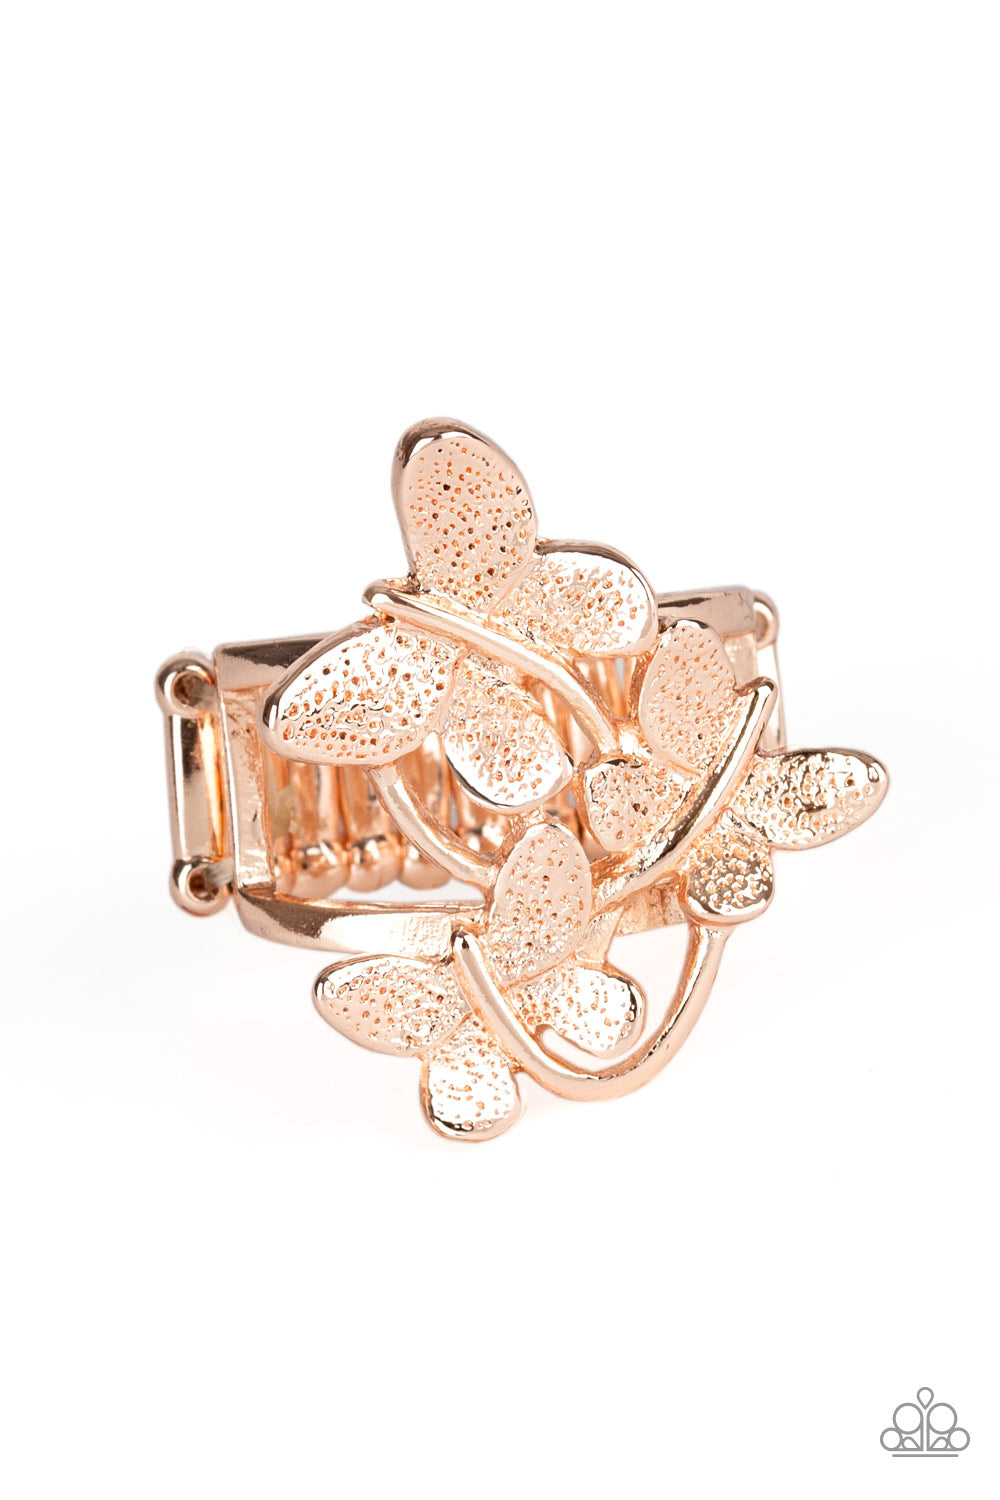 pittmanbling-and-jewelry-inc-presentsfull-of-flutter-rose-gold-paparazzi-accessories